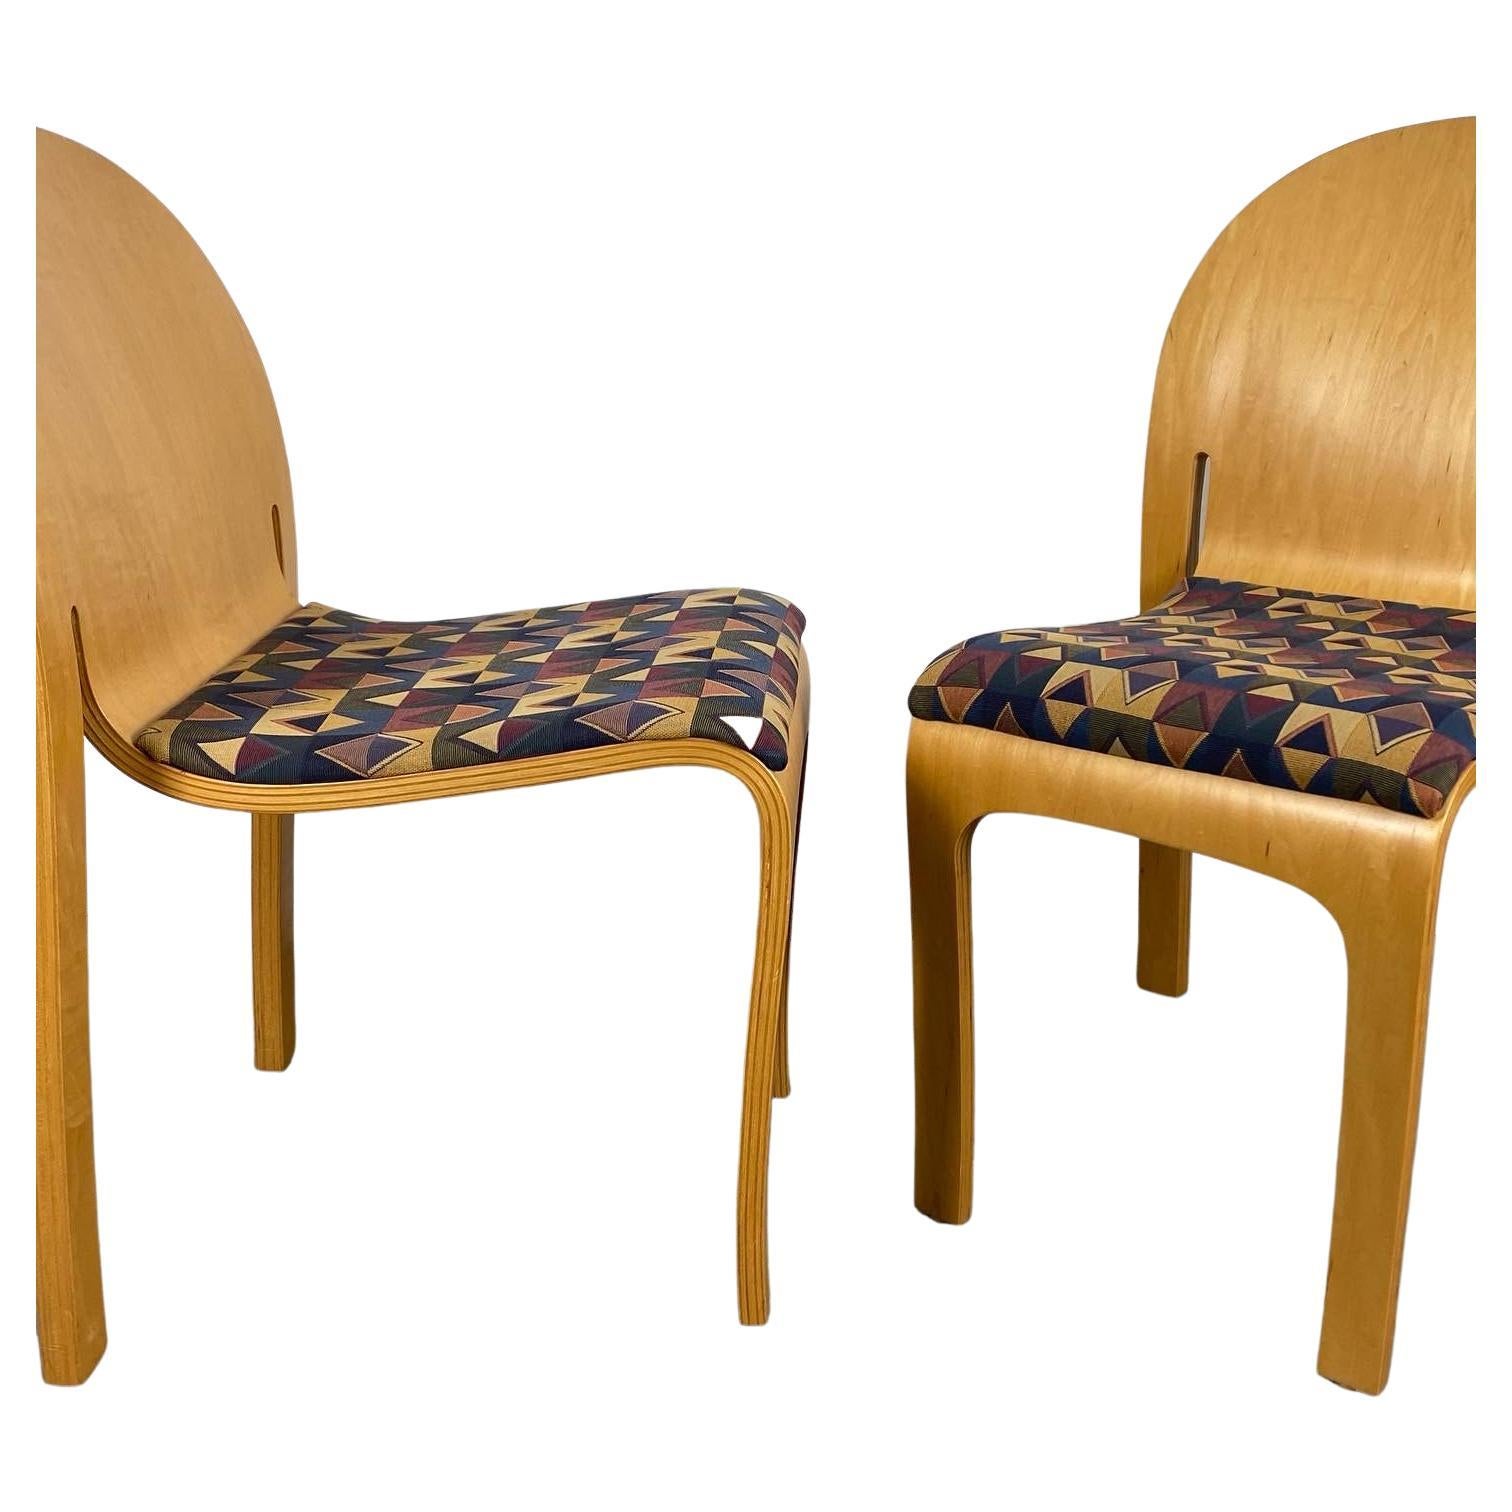 Peter Danko Vintage bentwood bodyform sculptured chair is made of solid Plywood Bent to form the Back, the Seat, and the Legs. Peter Danko Focuses on creating Sustainable designs that center on living in harmony with nature and creating a